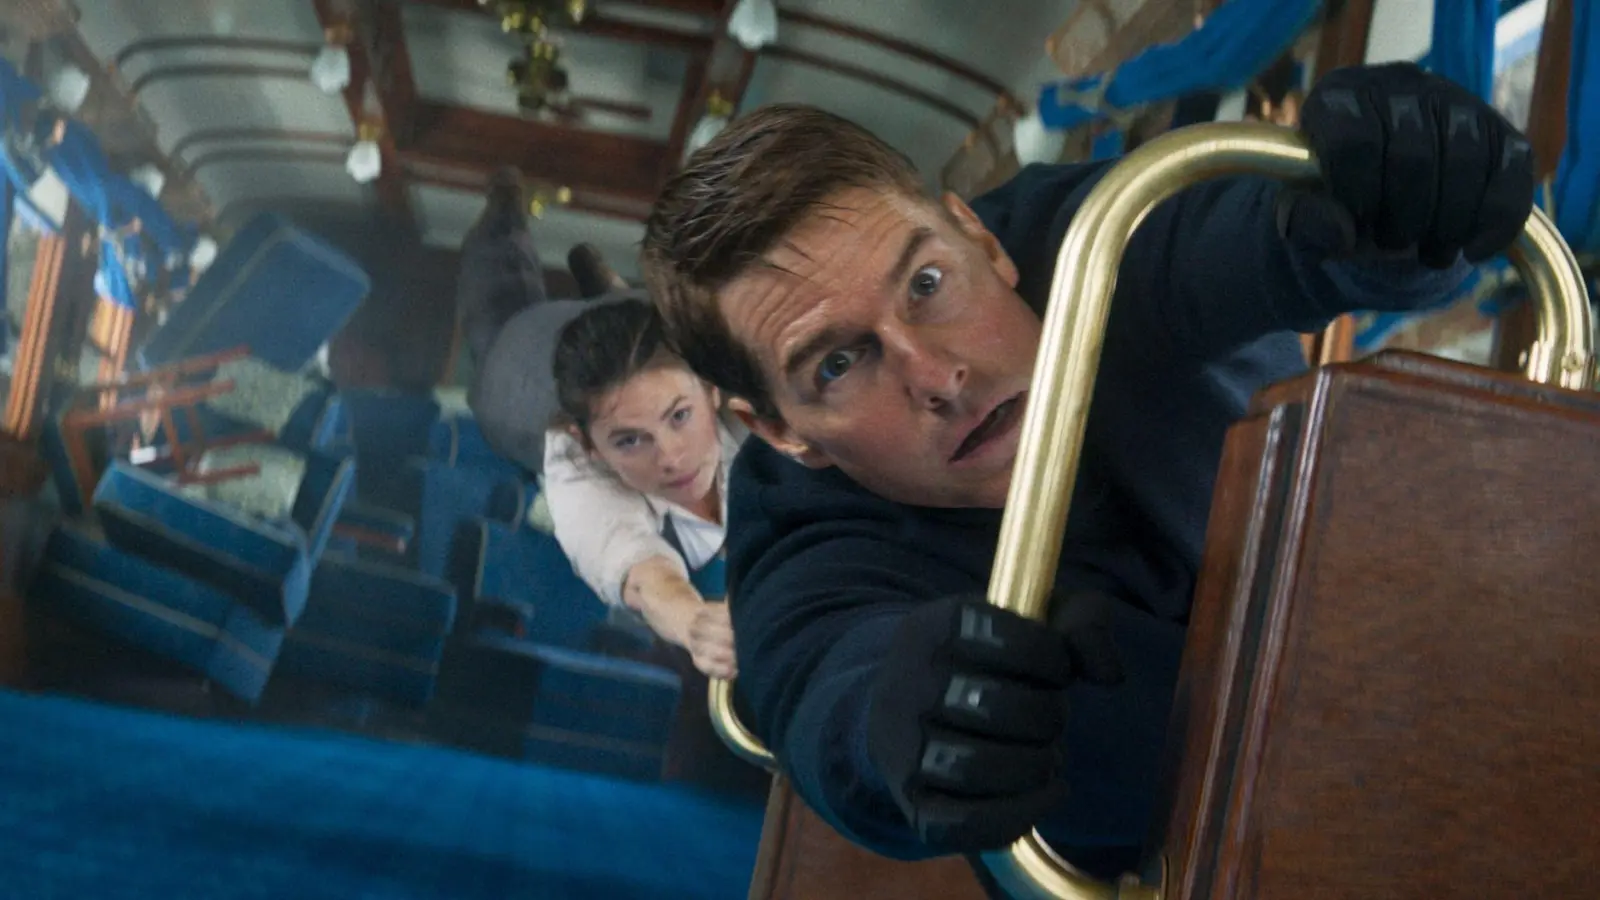 Tom Cruise als Ethan Hunt und Hayley Atwell als Grace in einer Szene des Films „Mission: Impossible 7 - Dead Reckoning Teil Eins“. (Foto: -/Paramount Pictures and Skydance/dpa)